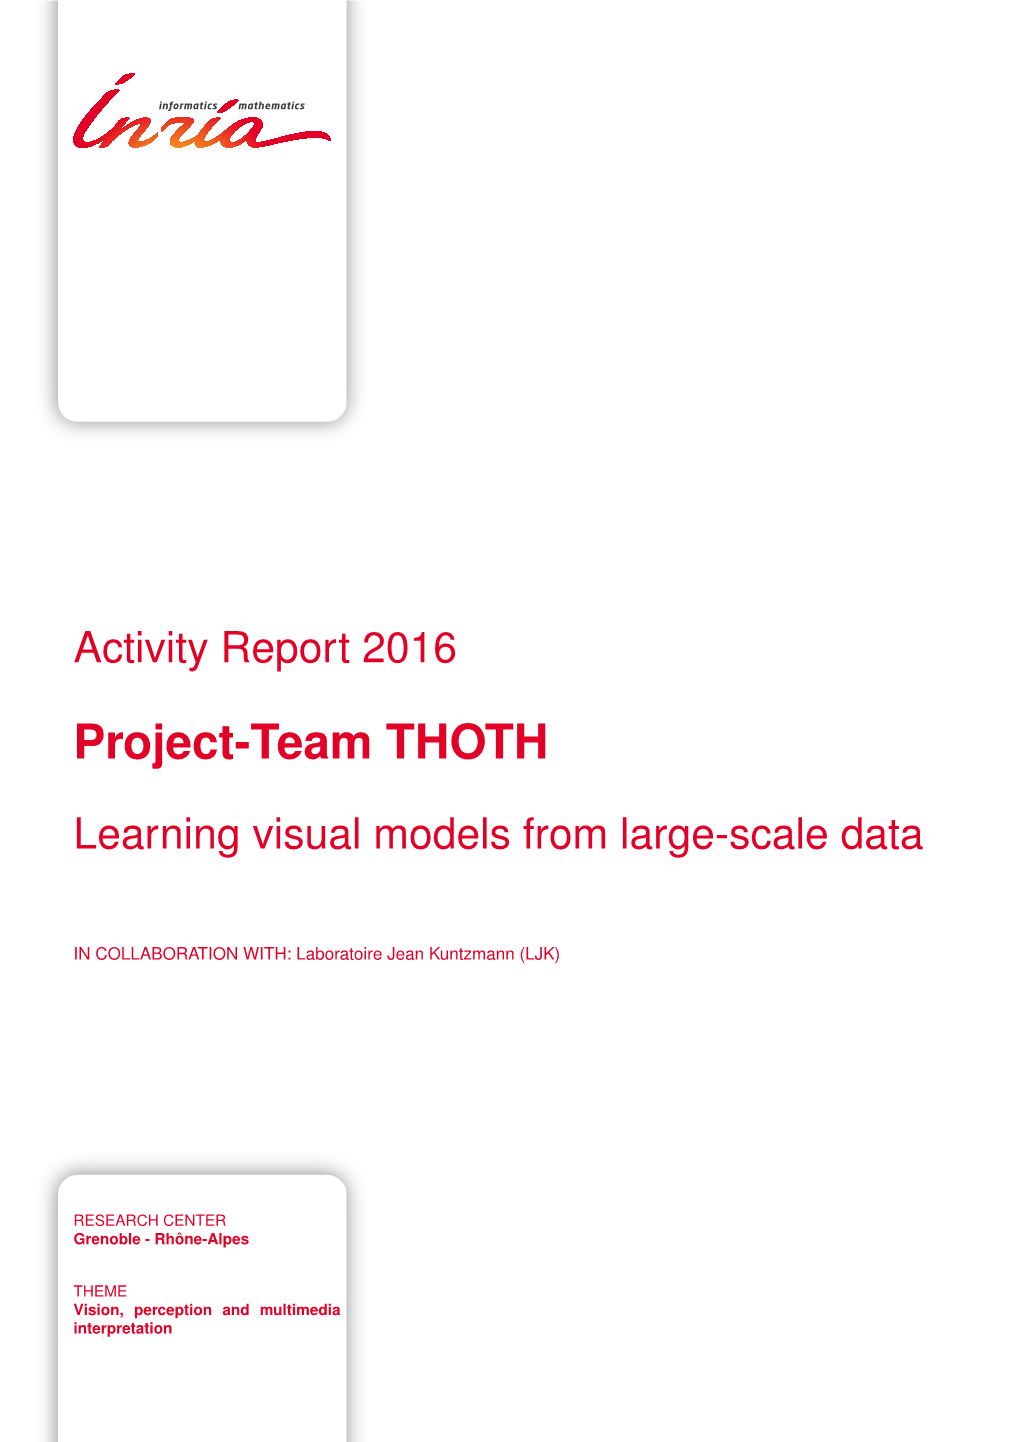 Project-Team THOTH